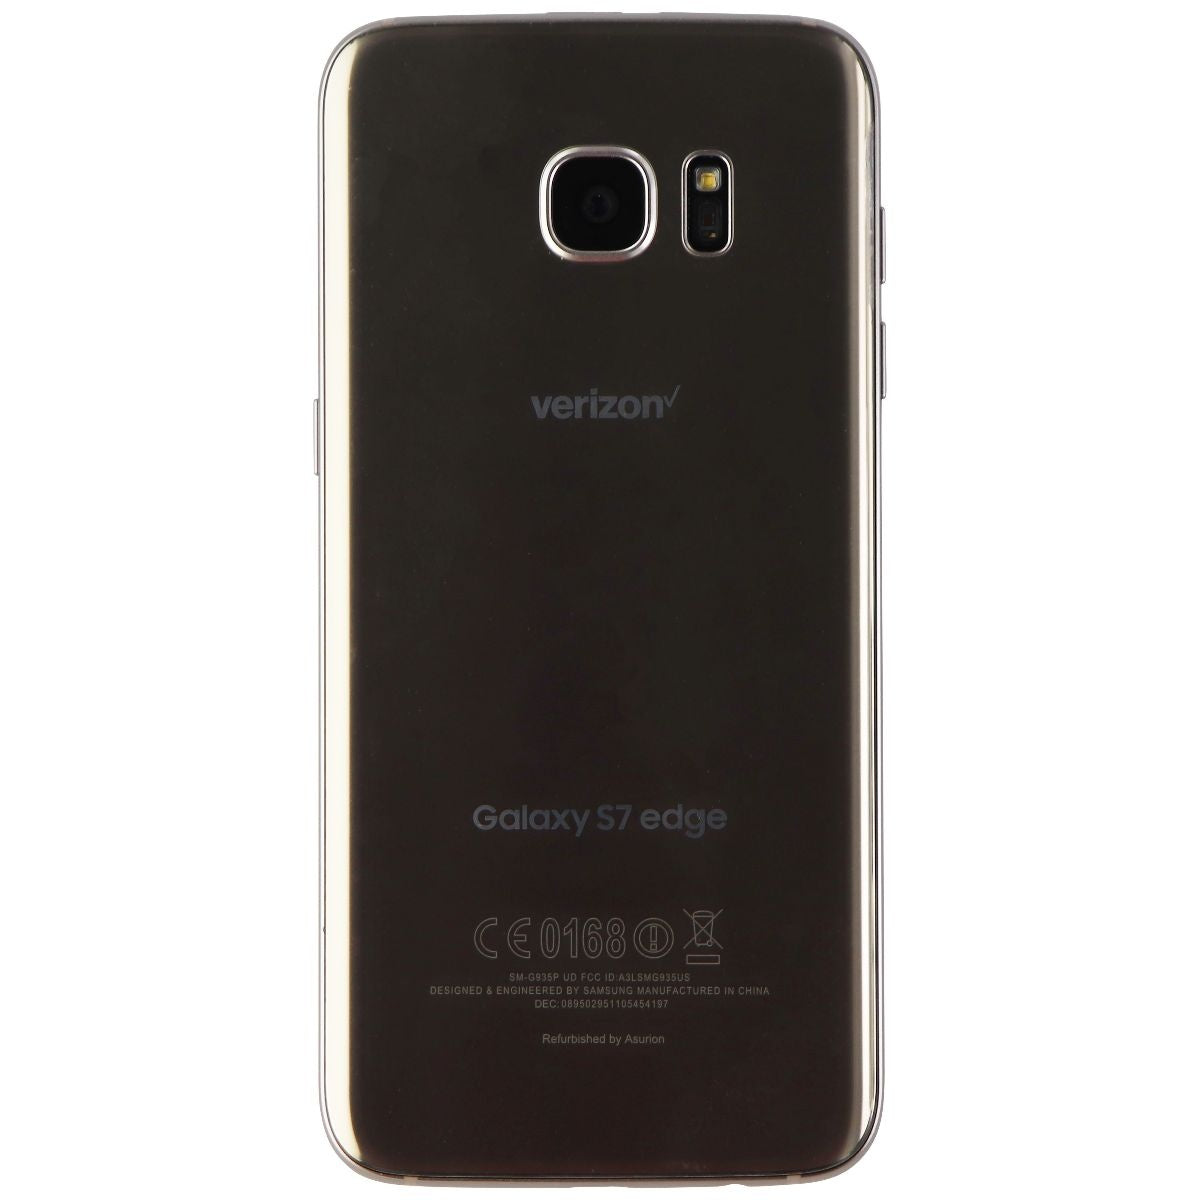 Samsung Galaxy S7 Edge (5.5-in) Smartphone (SM-G935P) Sprint Only - 32GB/Gold Cell Phones & Smartphones Samsung    - Simple Cell Bulk Wholesale Pricing - USA Seller